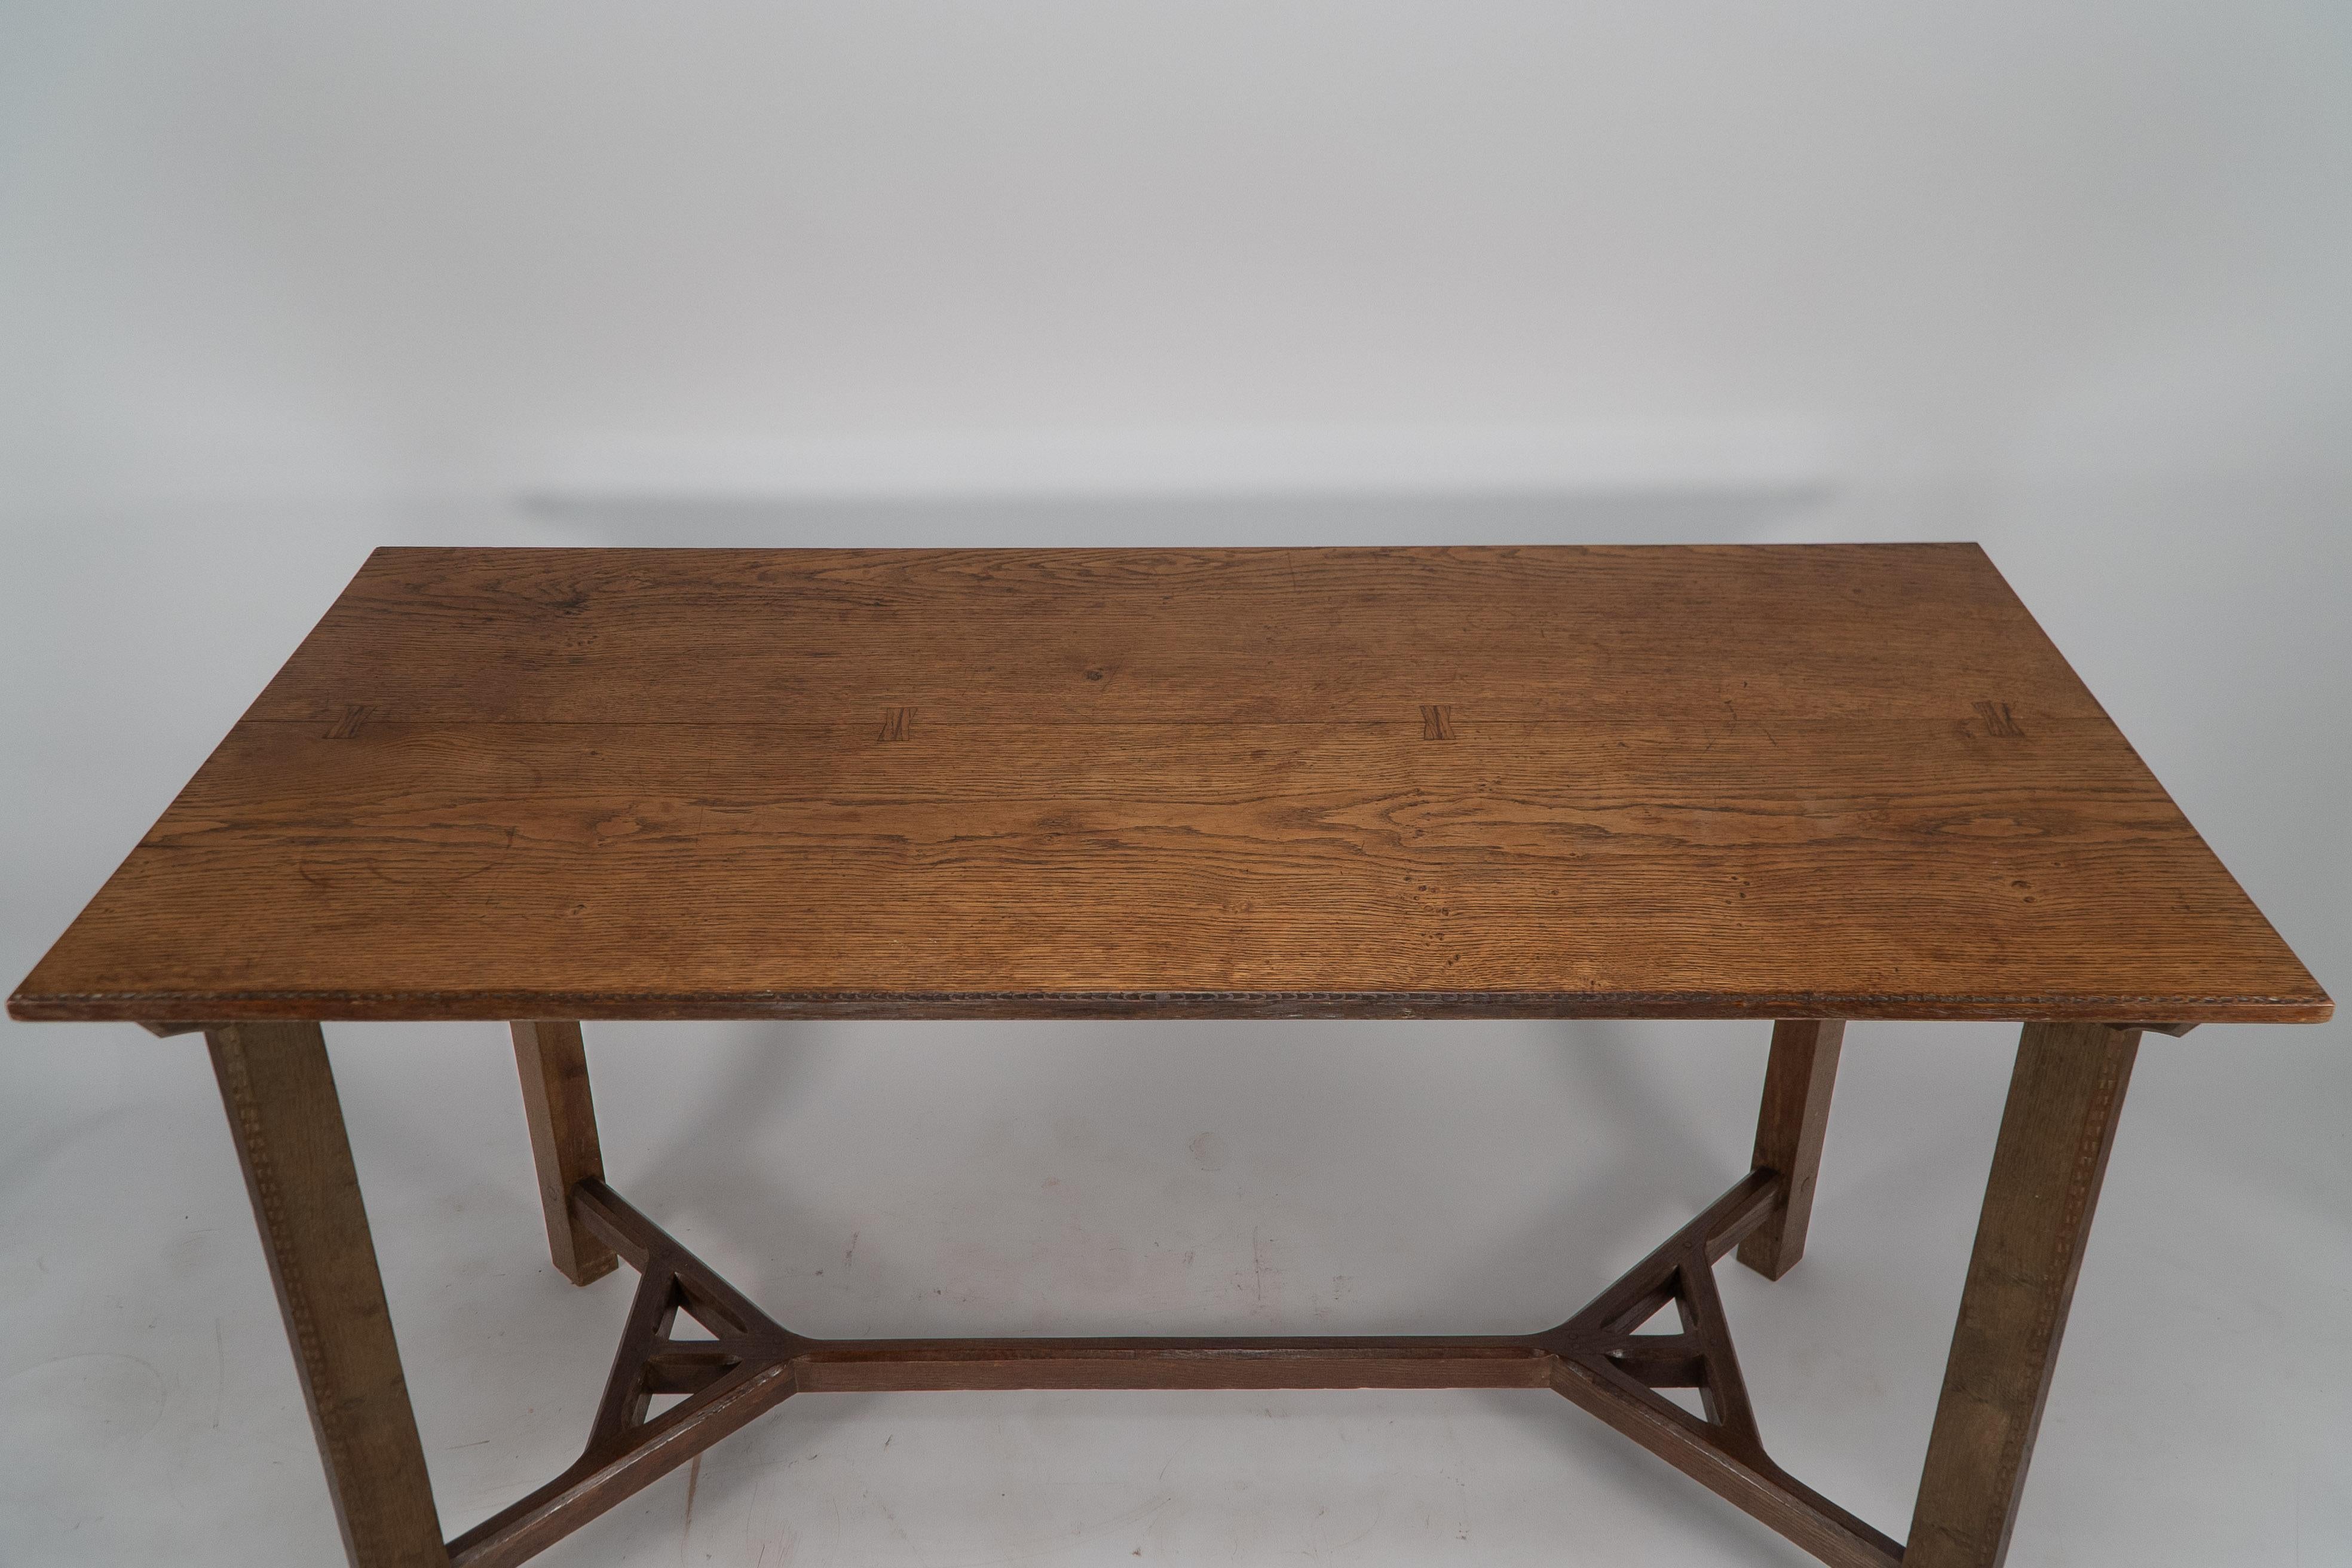 Sidney Barnsley attributed. A rare Cotswold School Arts and Crafts hayrake oak dining table with a rare double use of the hayrake stretcher design, one to the base uniting each leg and again identically repeated underneath the table top, where it